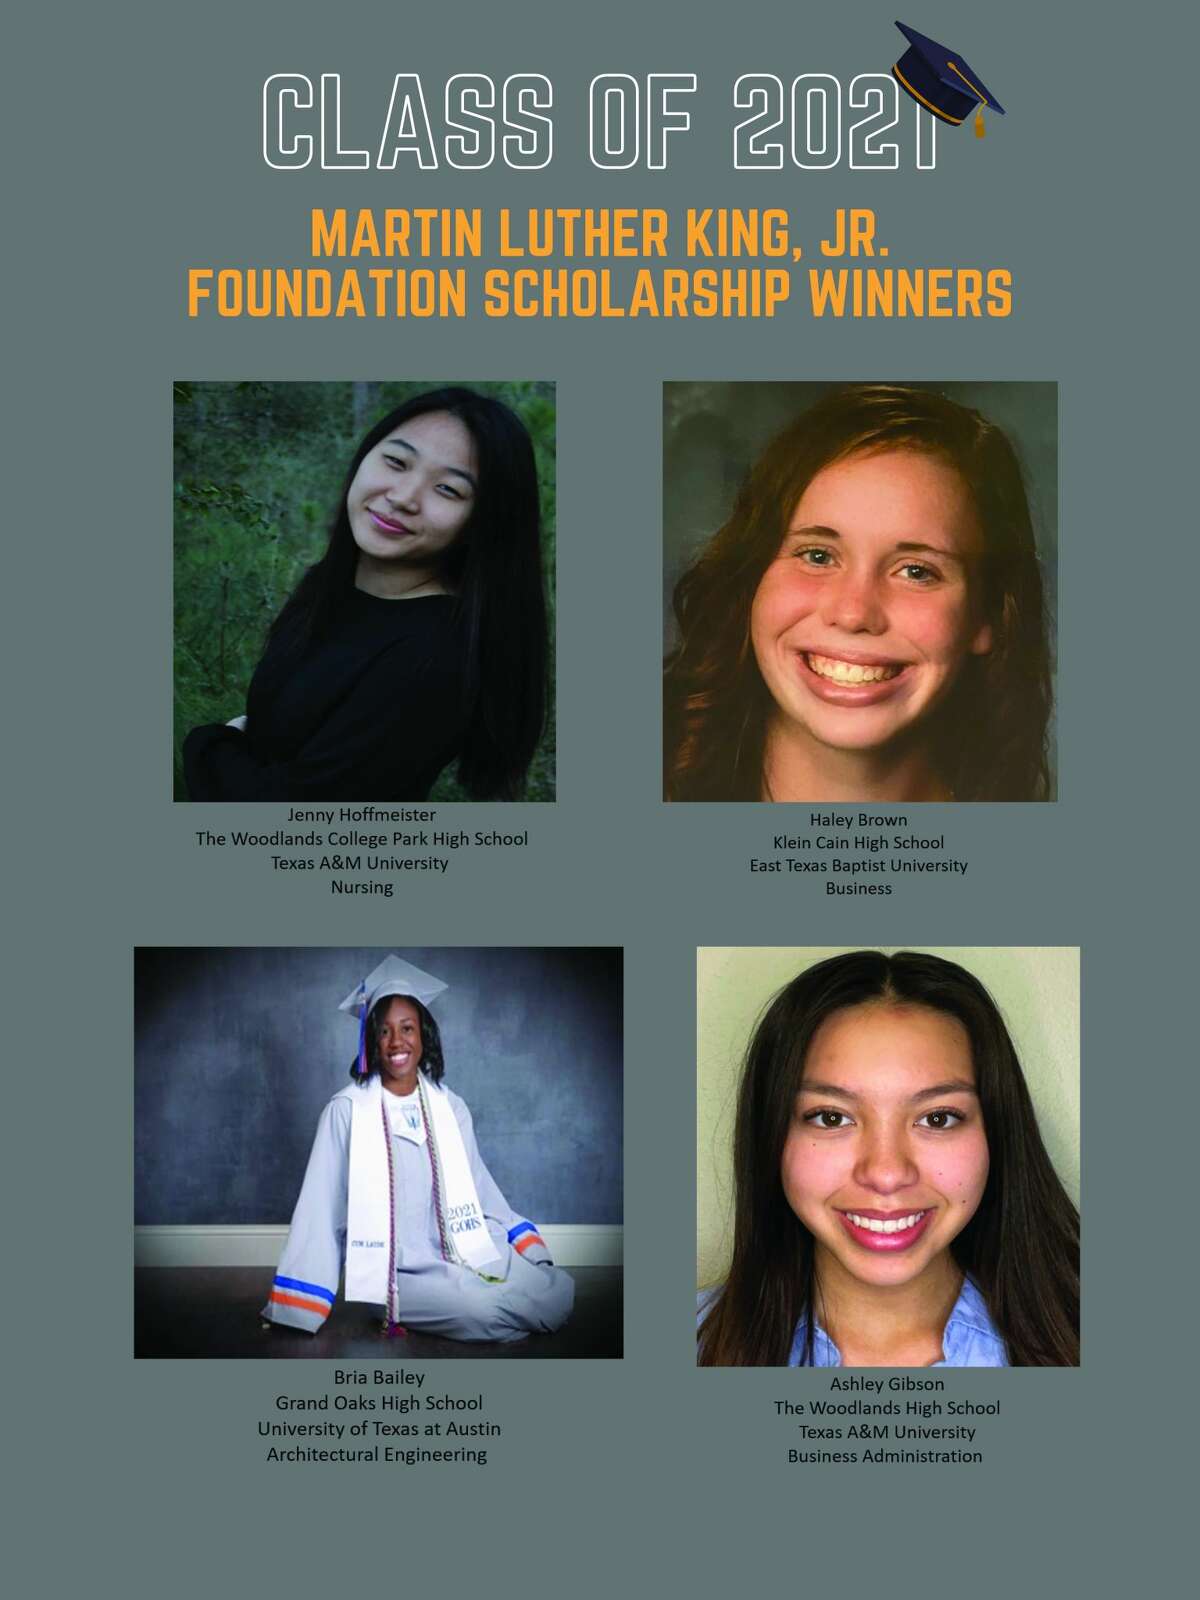 On May 15, The Martin Luther King, Jr. Foundation awarded 10 $1,000 scholarships to deserving students in Montgomery and Harris counties. This was made possible through the generosity of our sponsors, The Howard Hughes Corporation, WoodForest Bank, The McKee Family Foundation, TME Enterprises, Elsa and Jimmie Dotson, and many community donors. Donations made payable to the MLK Scholarship Foundation can me mailed toÂ 594 Sawdust Road, P. O. Box 252, The Woodlands, Texas 77389.